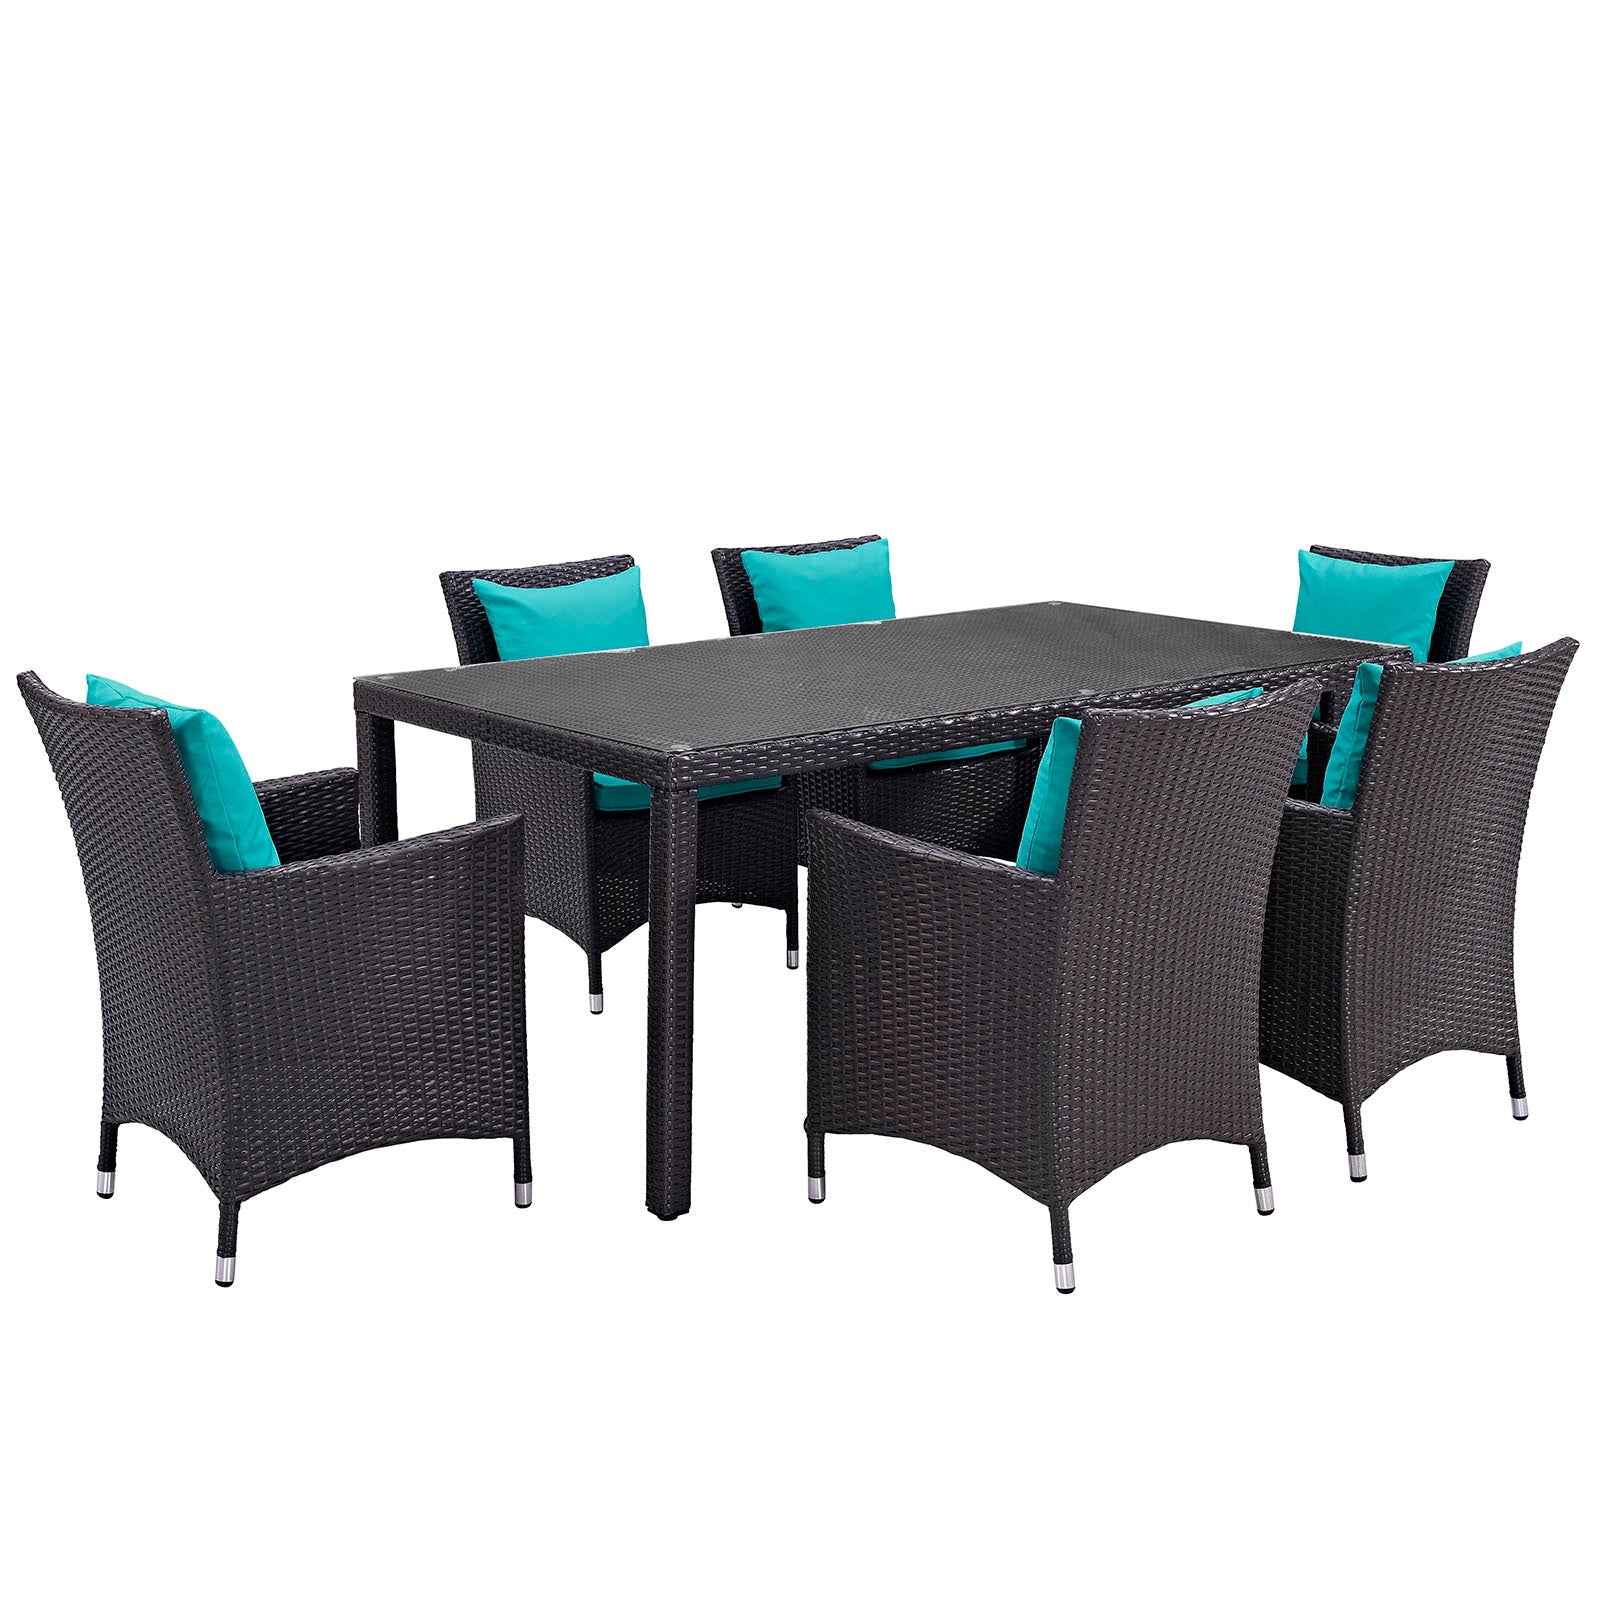 Modway Outdoor Dining Sets - Convene 7 Piece Outdoor Patio Dining Set Espresso Turquoise